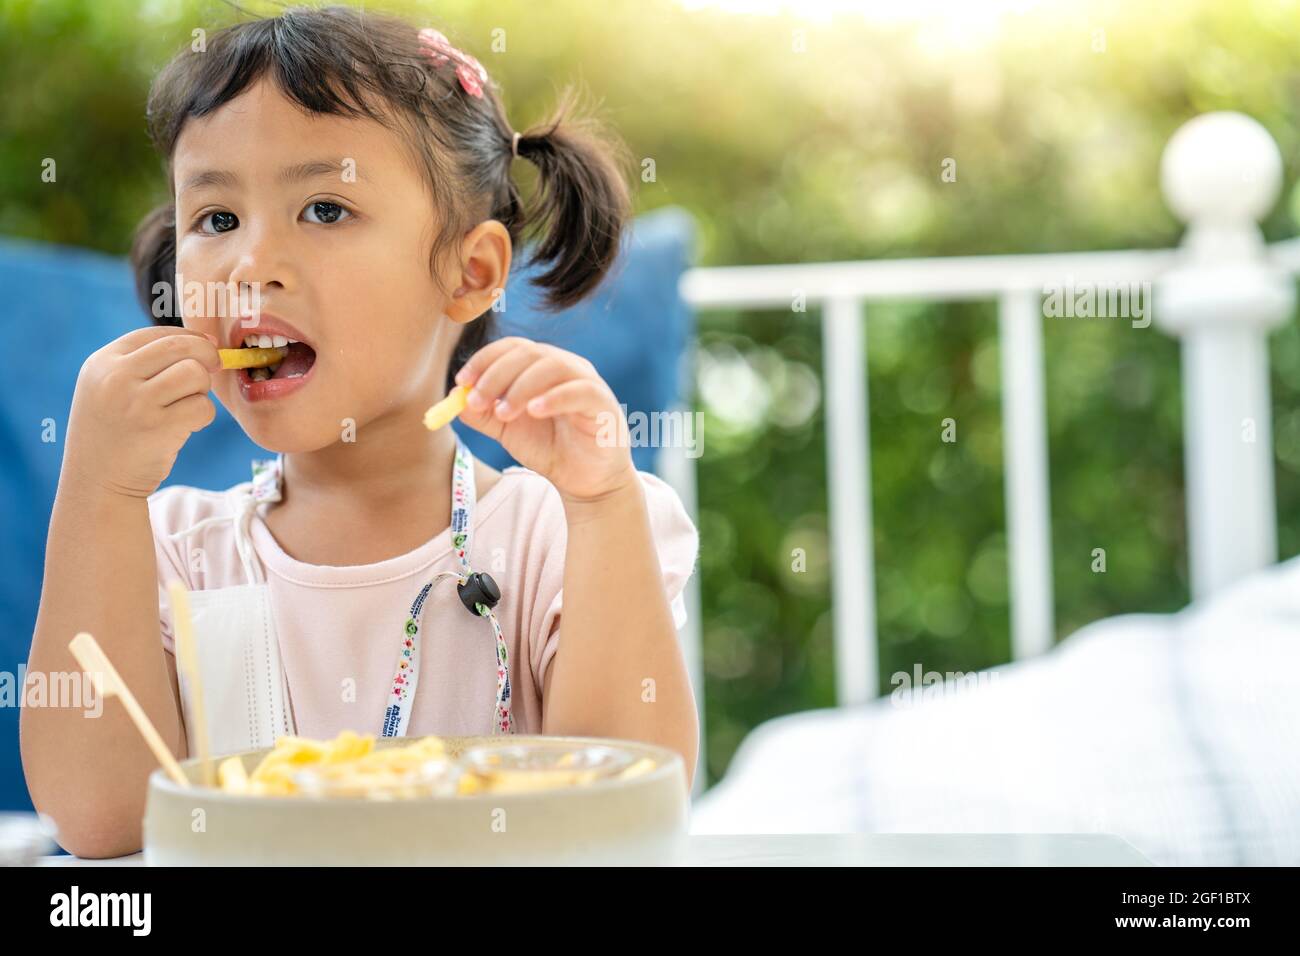 A cute little Thai girl eating French fries Stock Photo